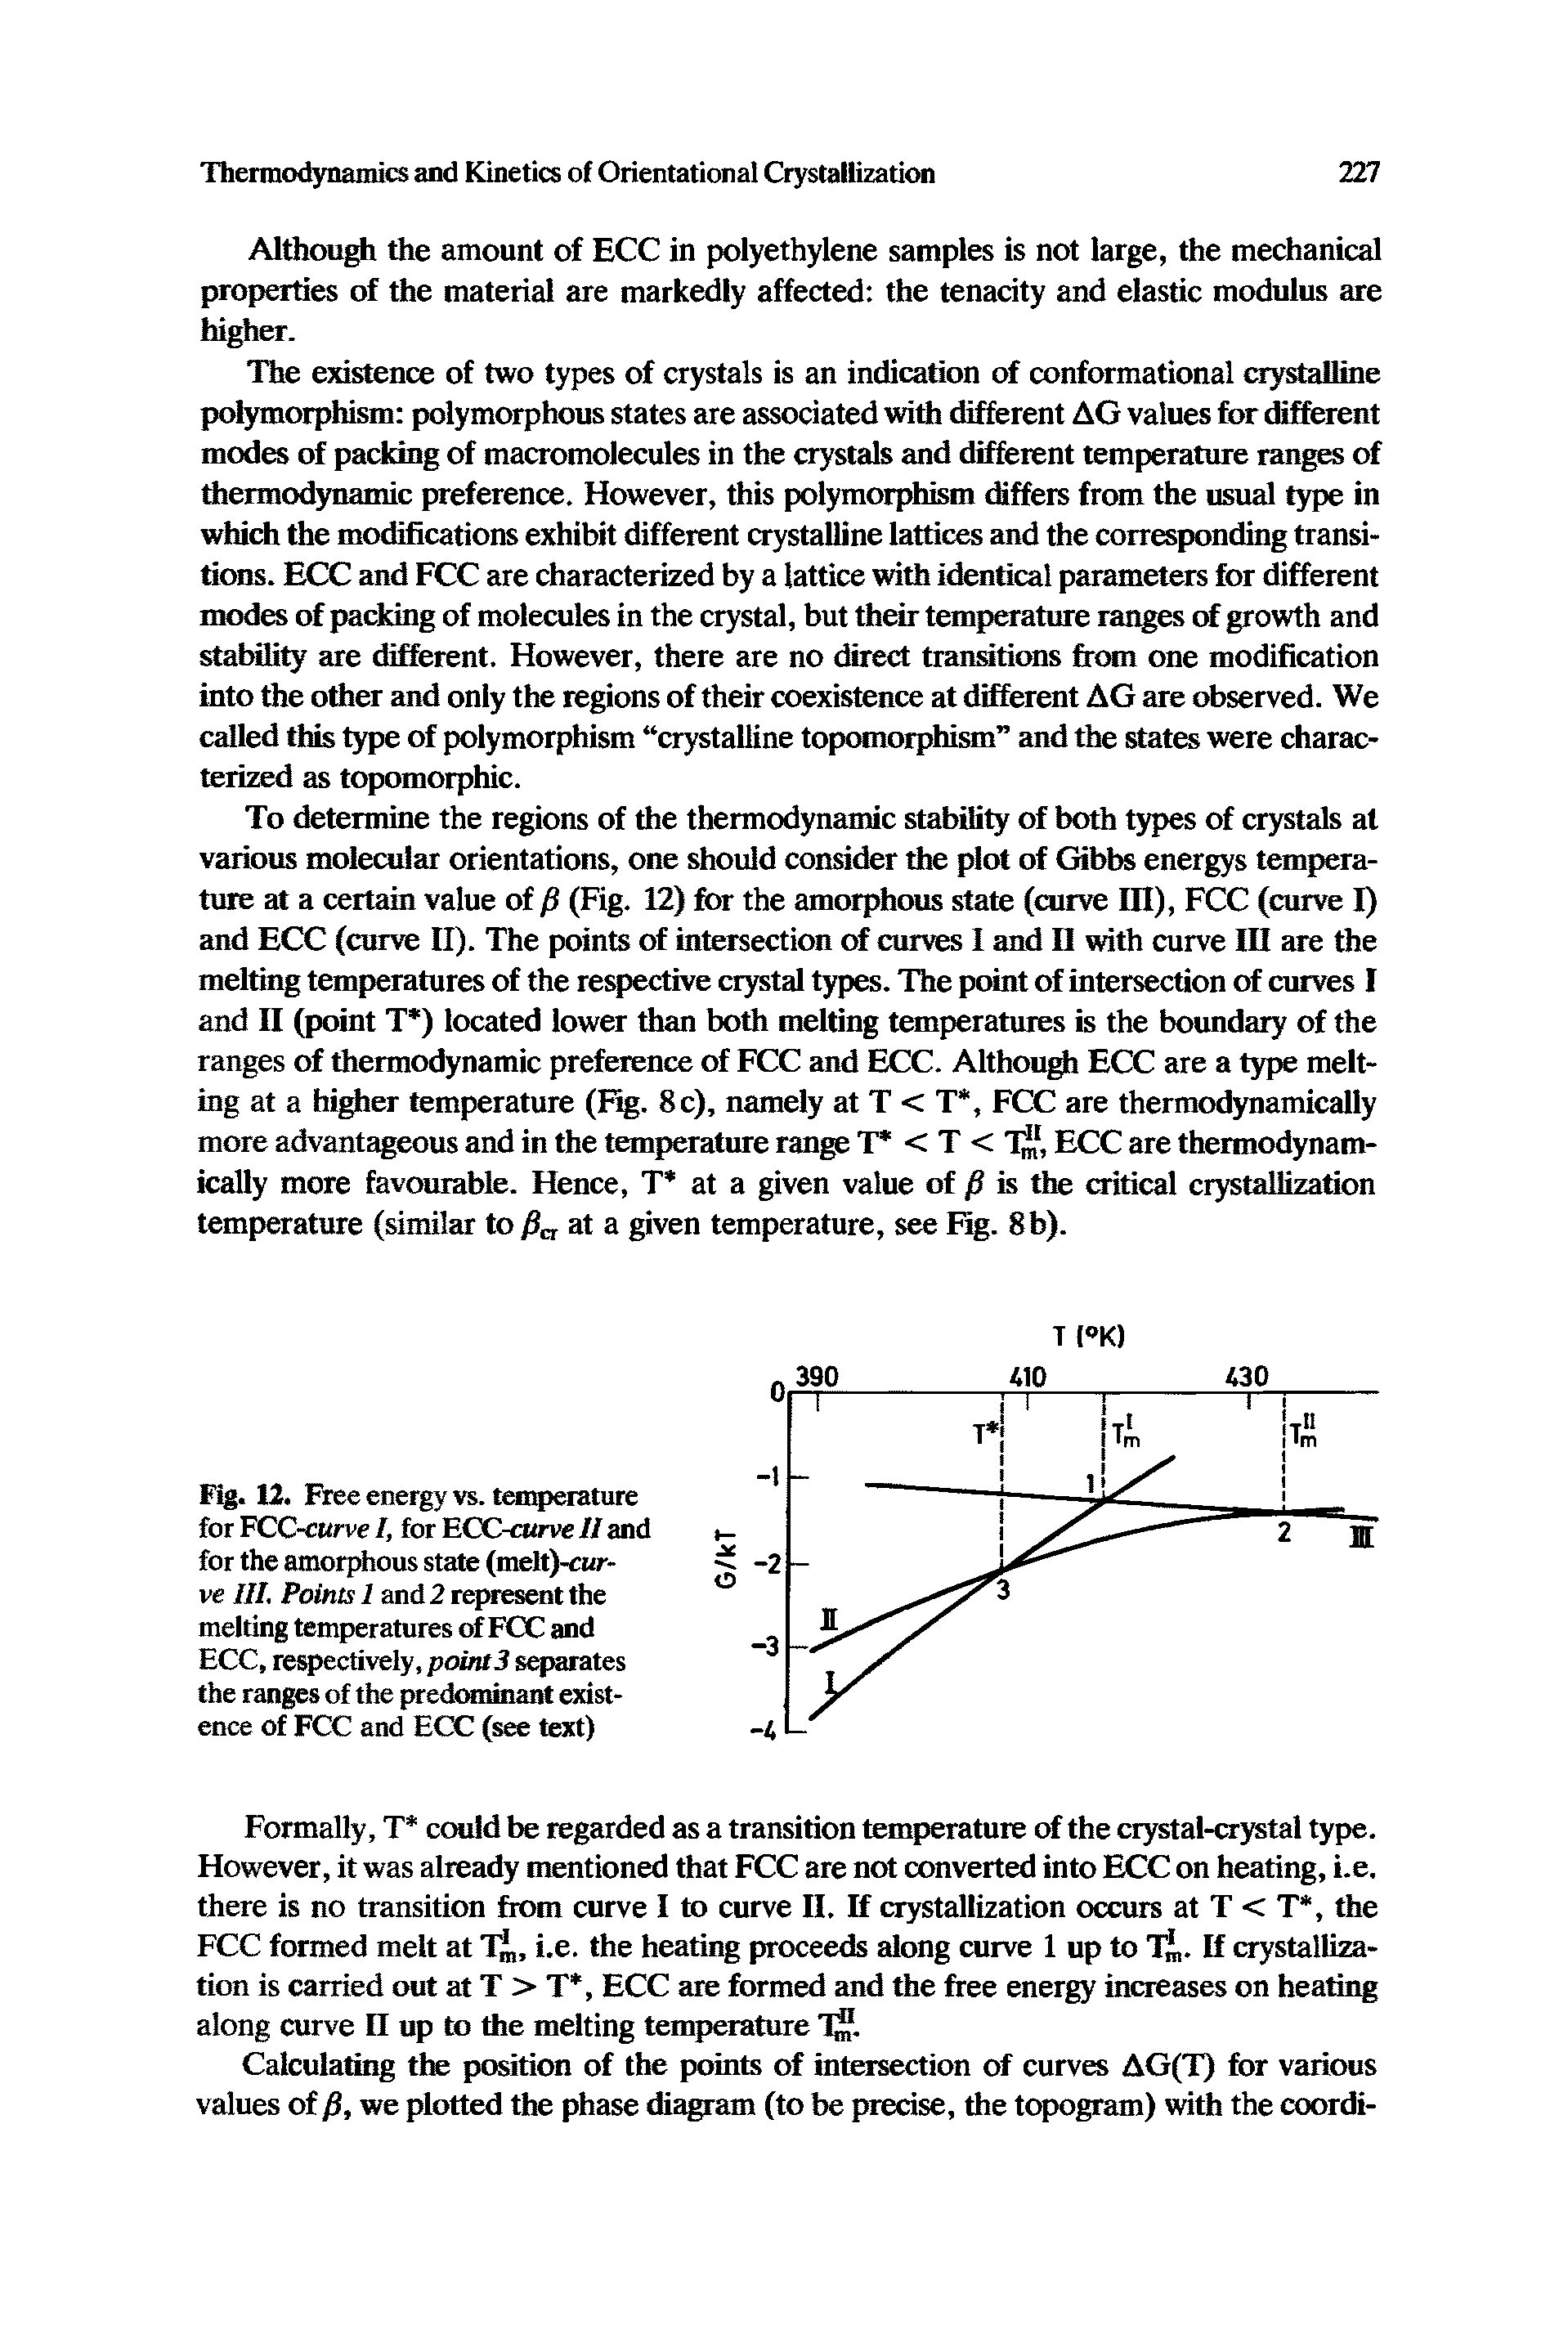 Fig. 12. Free energy vs. temperature for FCC-cttrve /, for ECC-curve II and for the amorphous state (melt)-cur-ve III. Points 1 and 2 represent the melting temperatures of FCC and ECC, respectively, point 3 separates the ranges of the predominant existence of FCC and ECC (see text)...